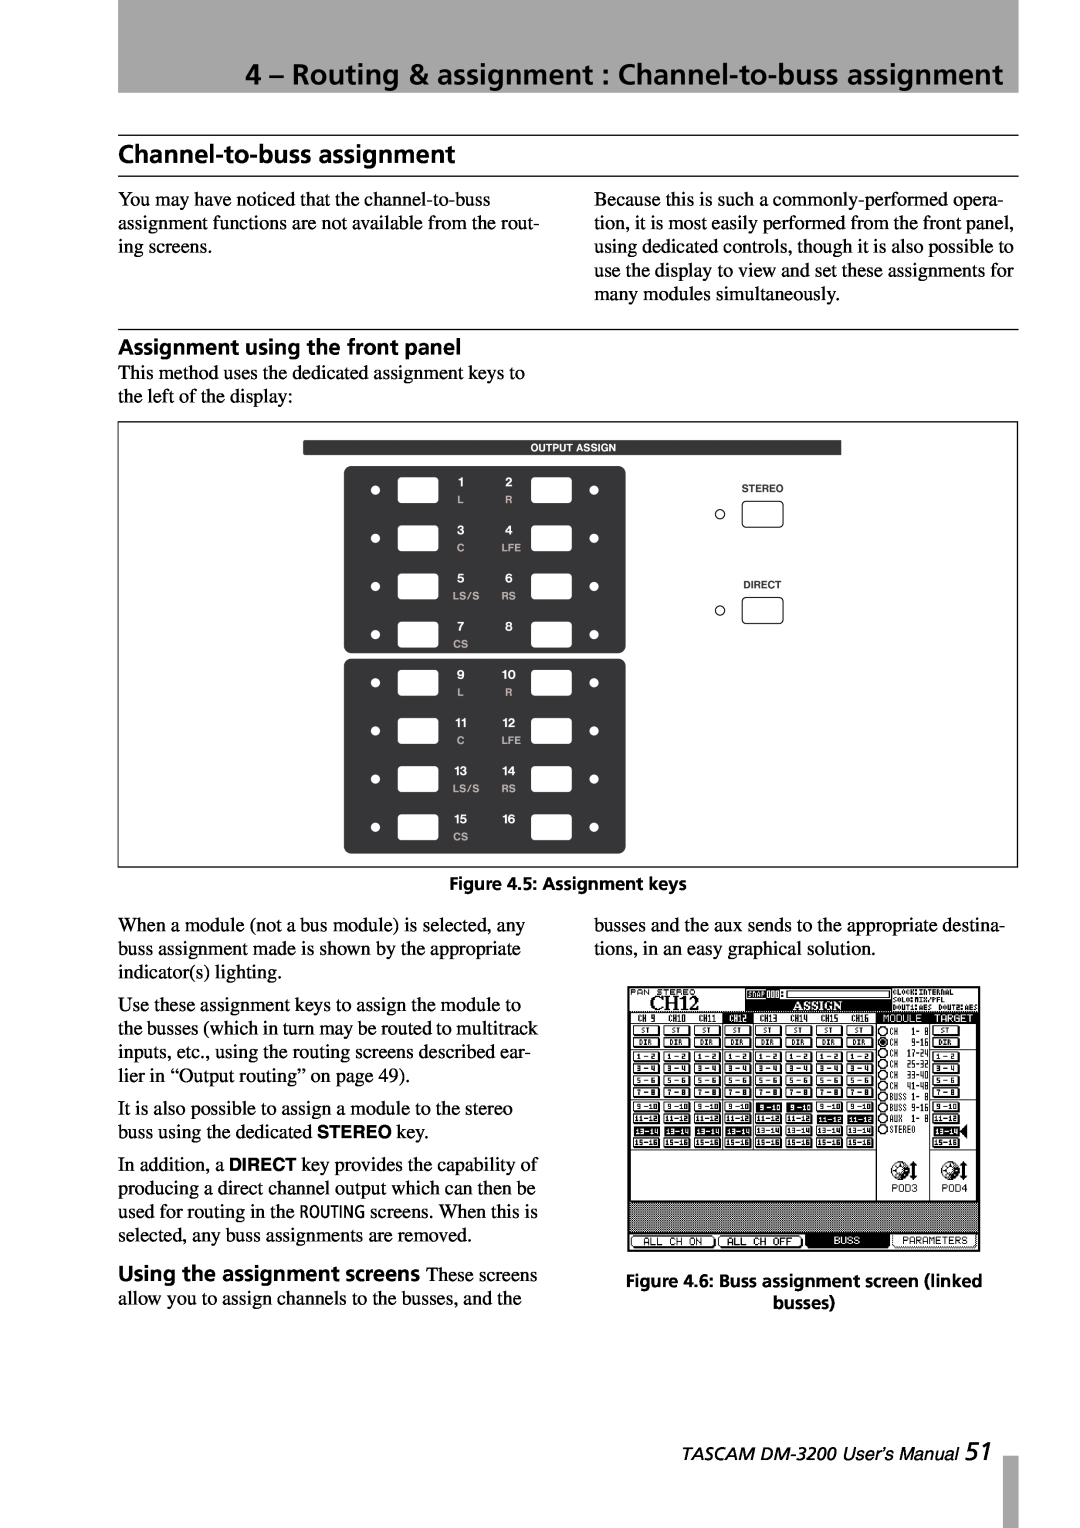 Tascam DM-3200 owner manual Channel-to-bussassignment, Assignment using the front panel 